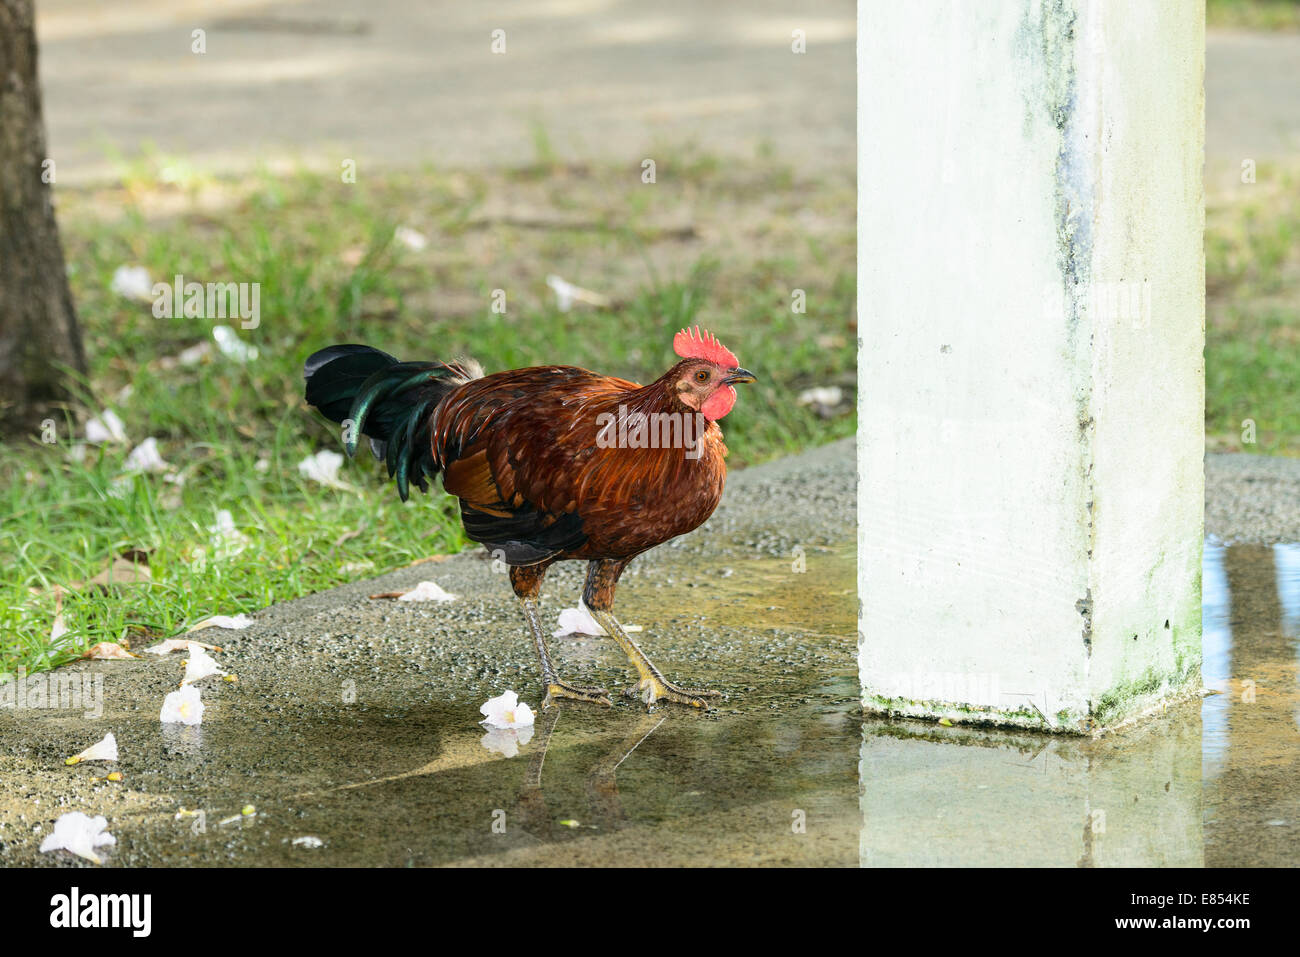 A free range rooster or cockerel drinks from a puddle on the island of St. Croix, U. S. Virgin Islands. Stock Photo